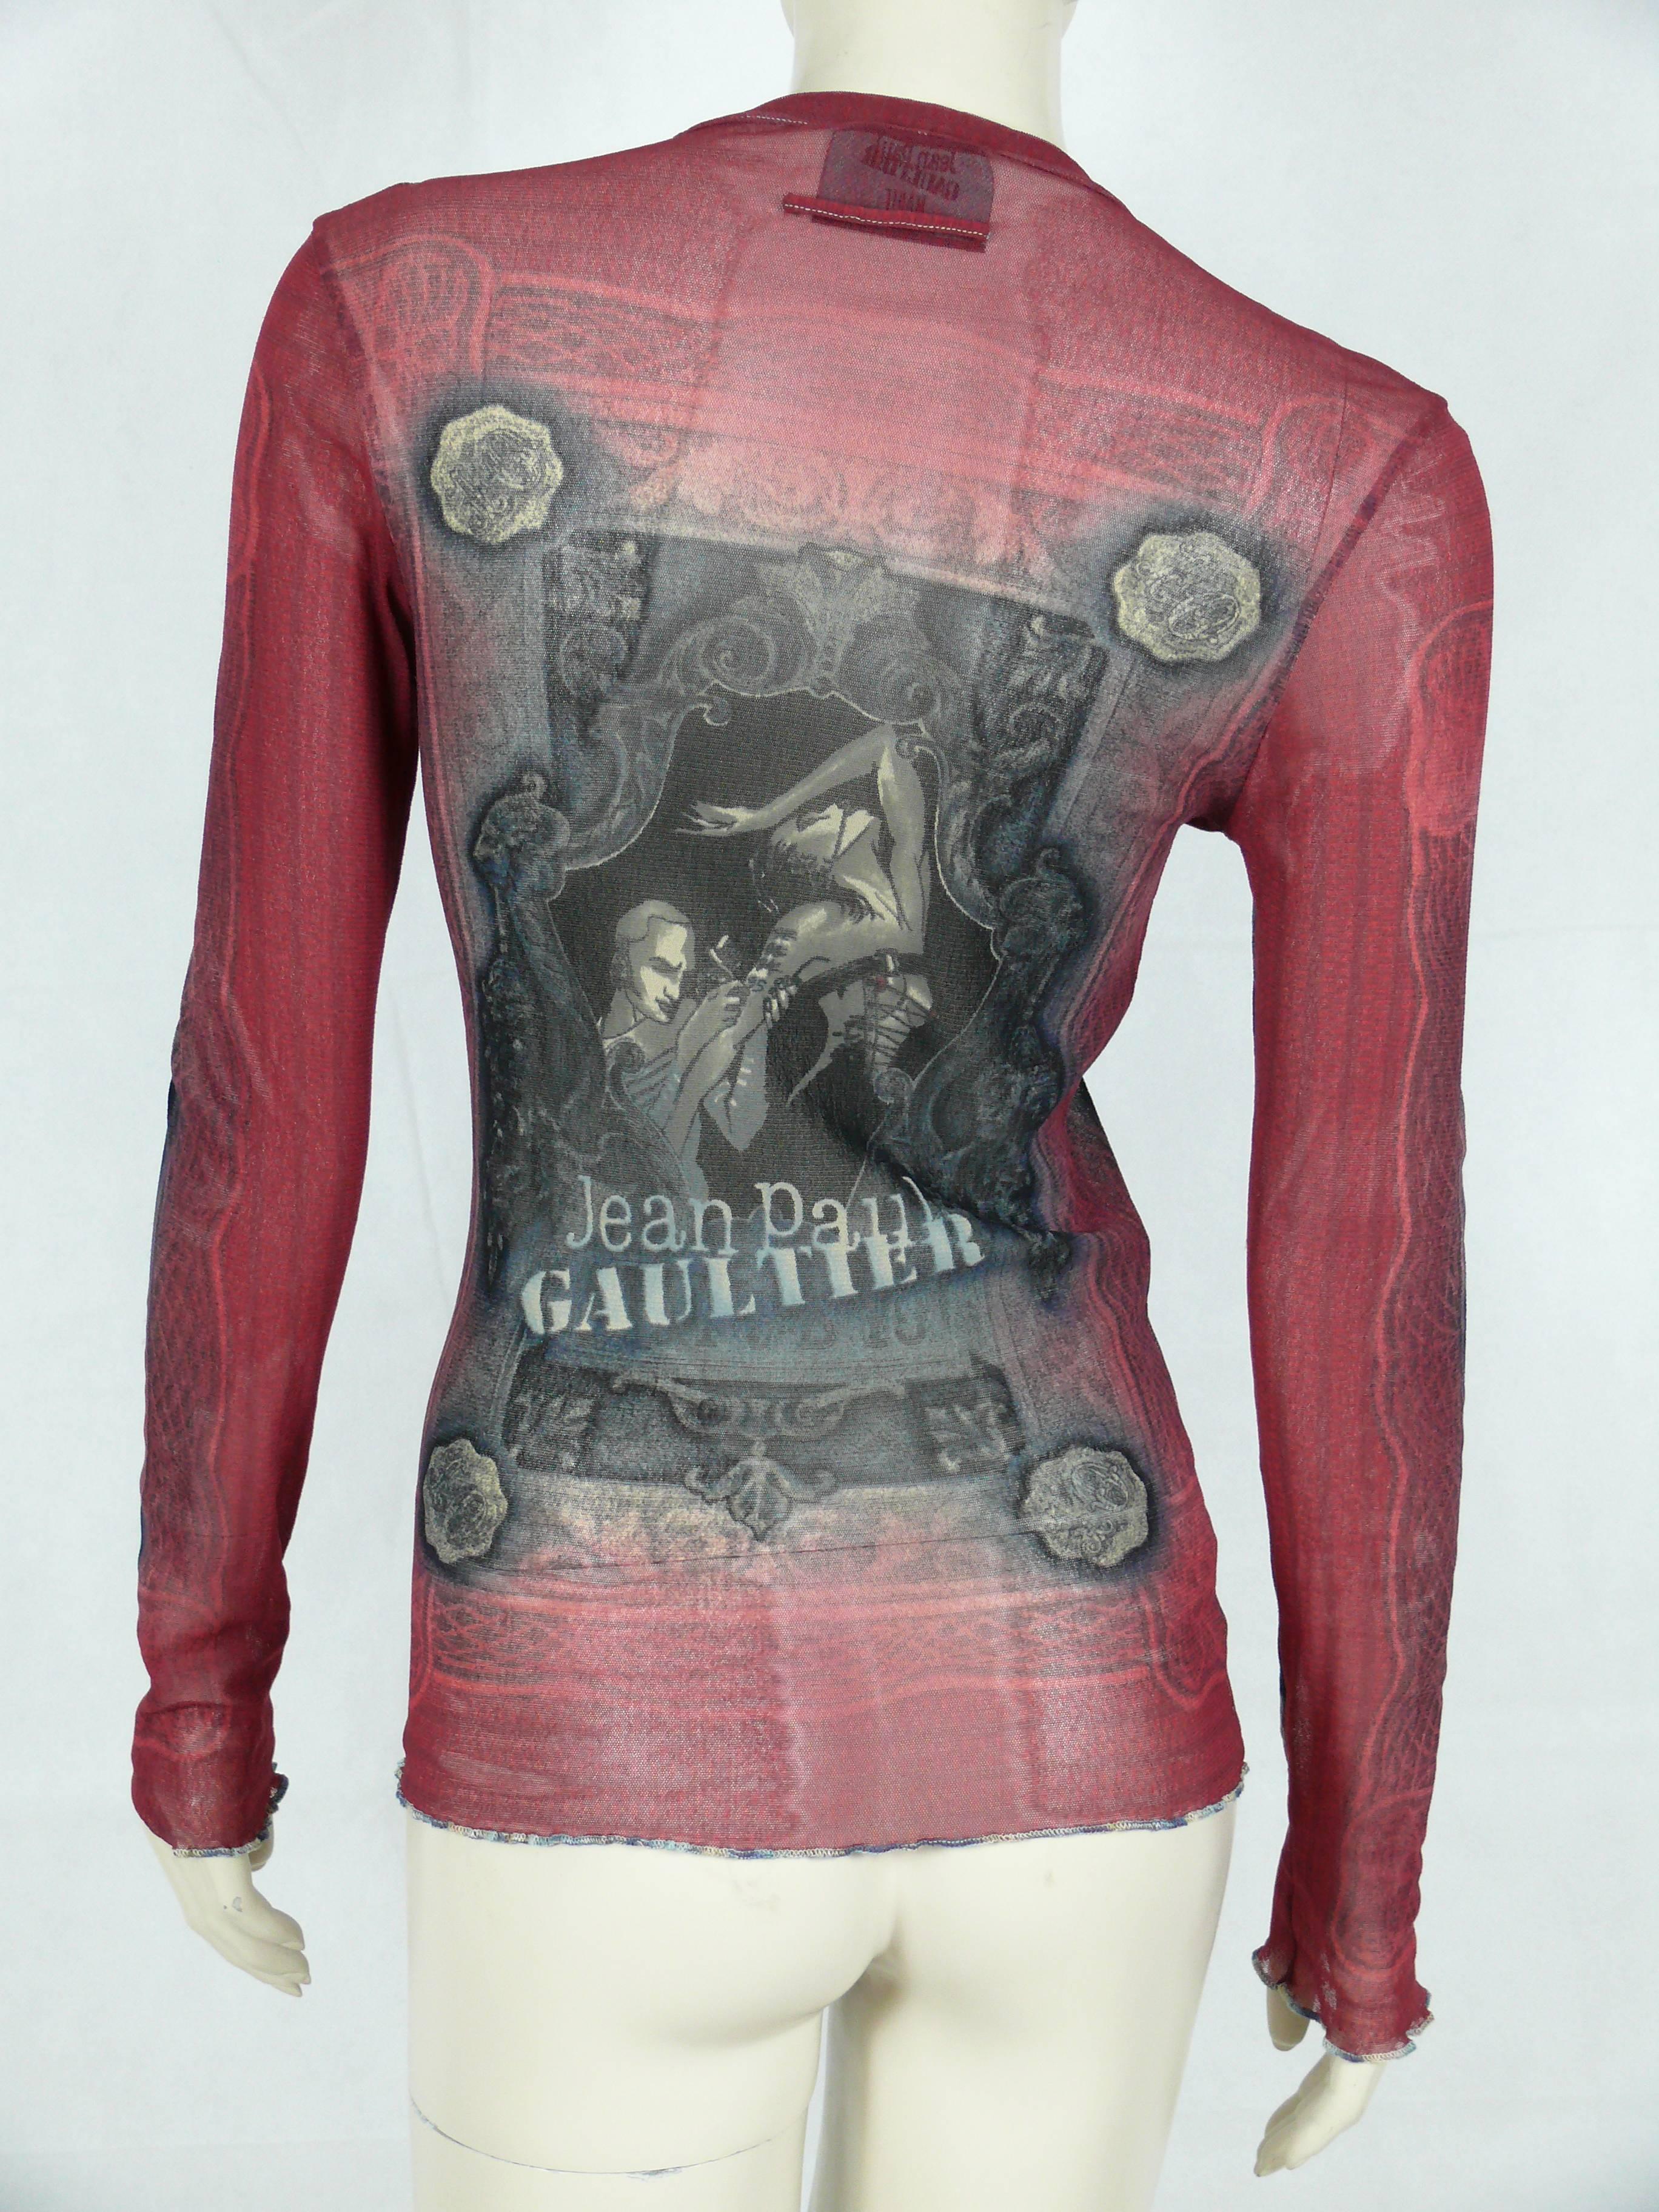 JEAN PAUL GAULTIER gorgeous tattoo Fuzzi mesh unisex top.

Label reads JEAN PAUL GAULTIER MAILLE Made in Italy.

Size tag missing.
Please check measurements.

Composition tag reads : 100 % polyamide.

Indicative measurements taken laid flat and